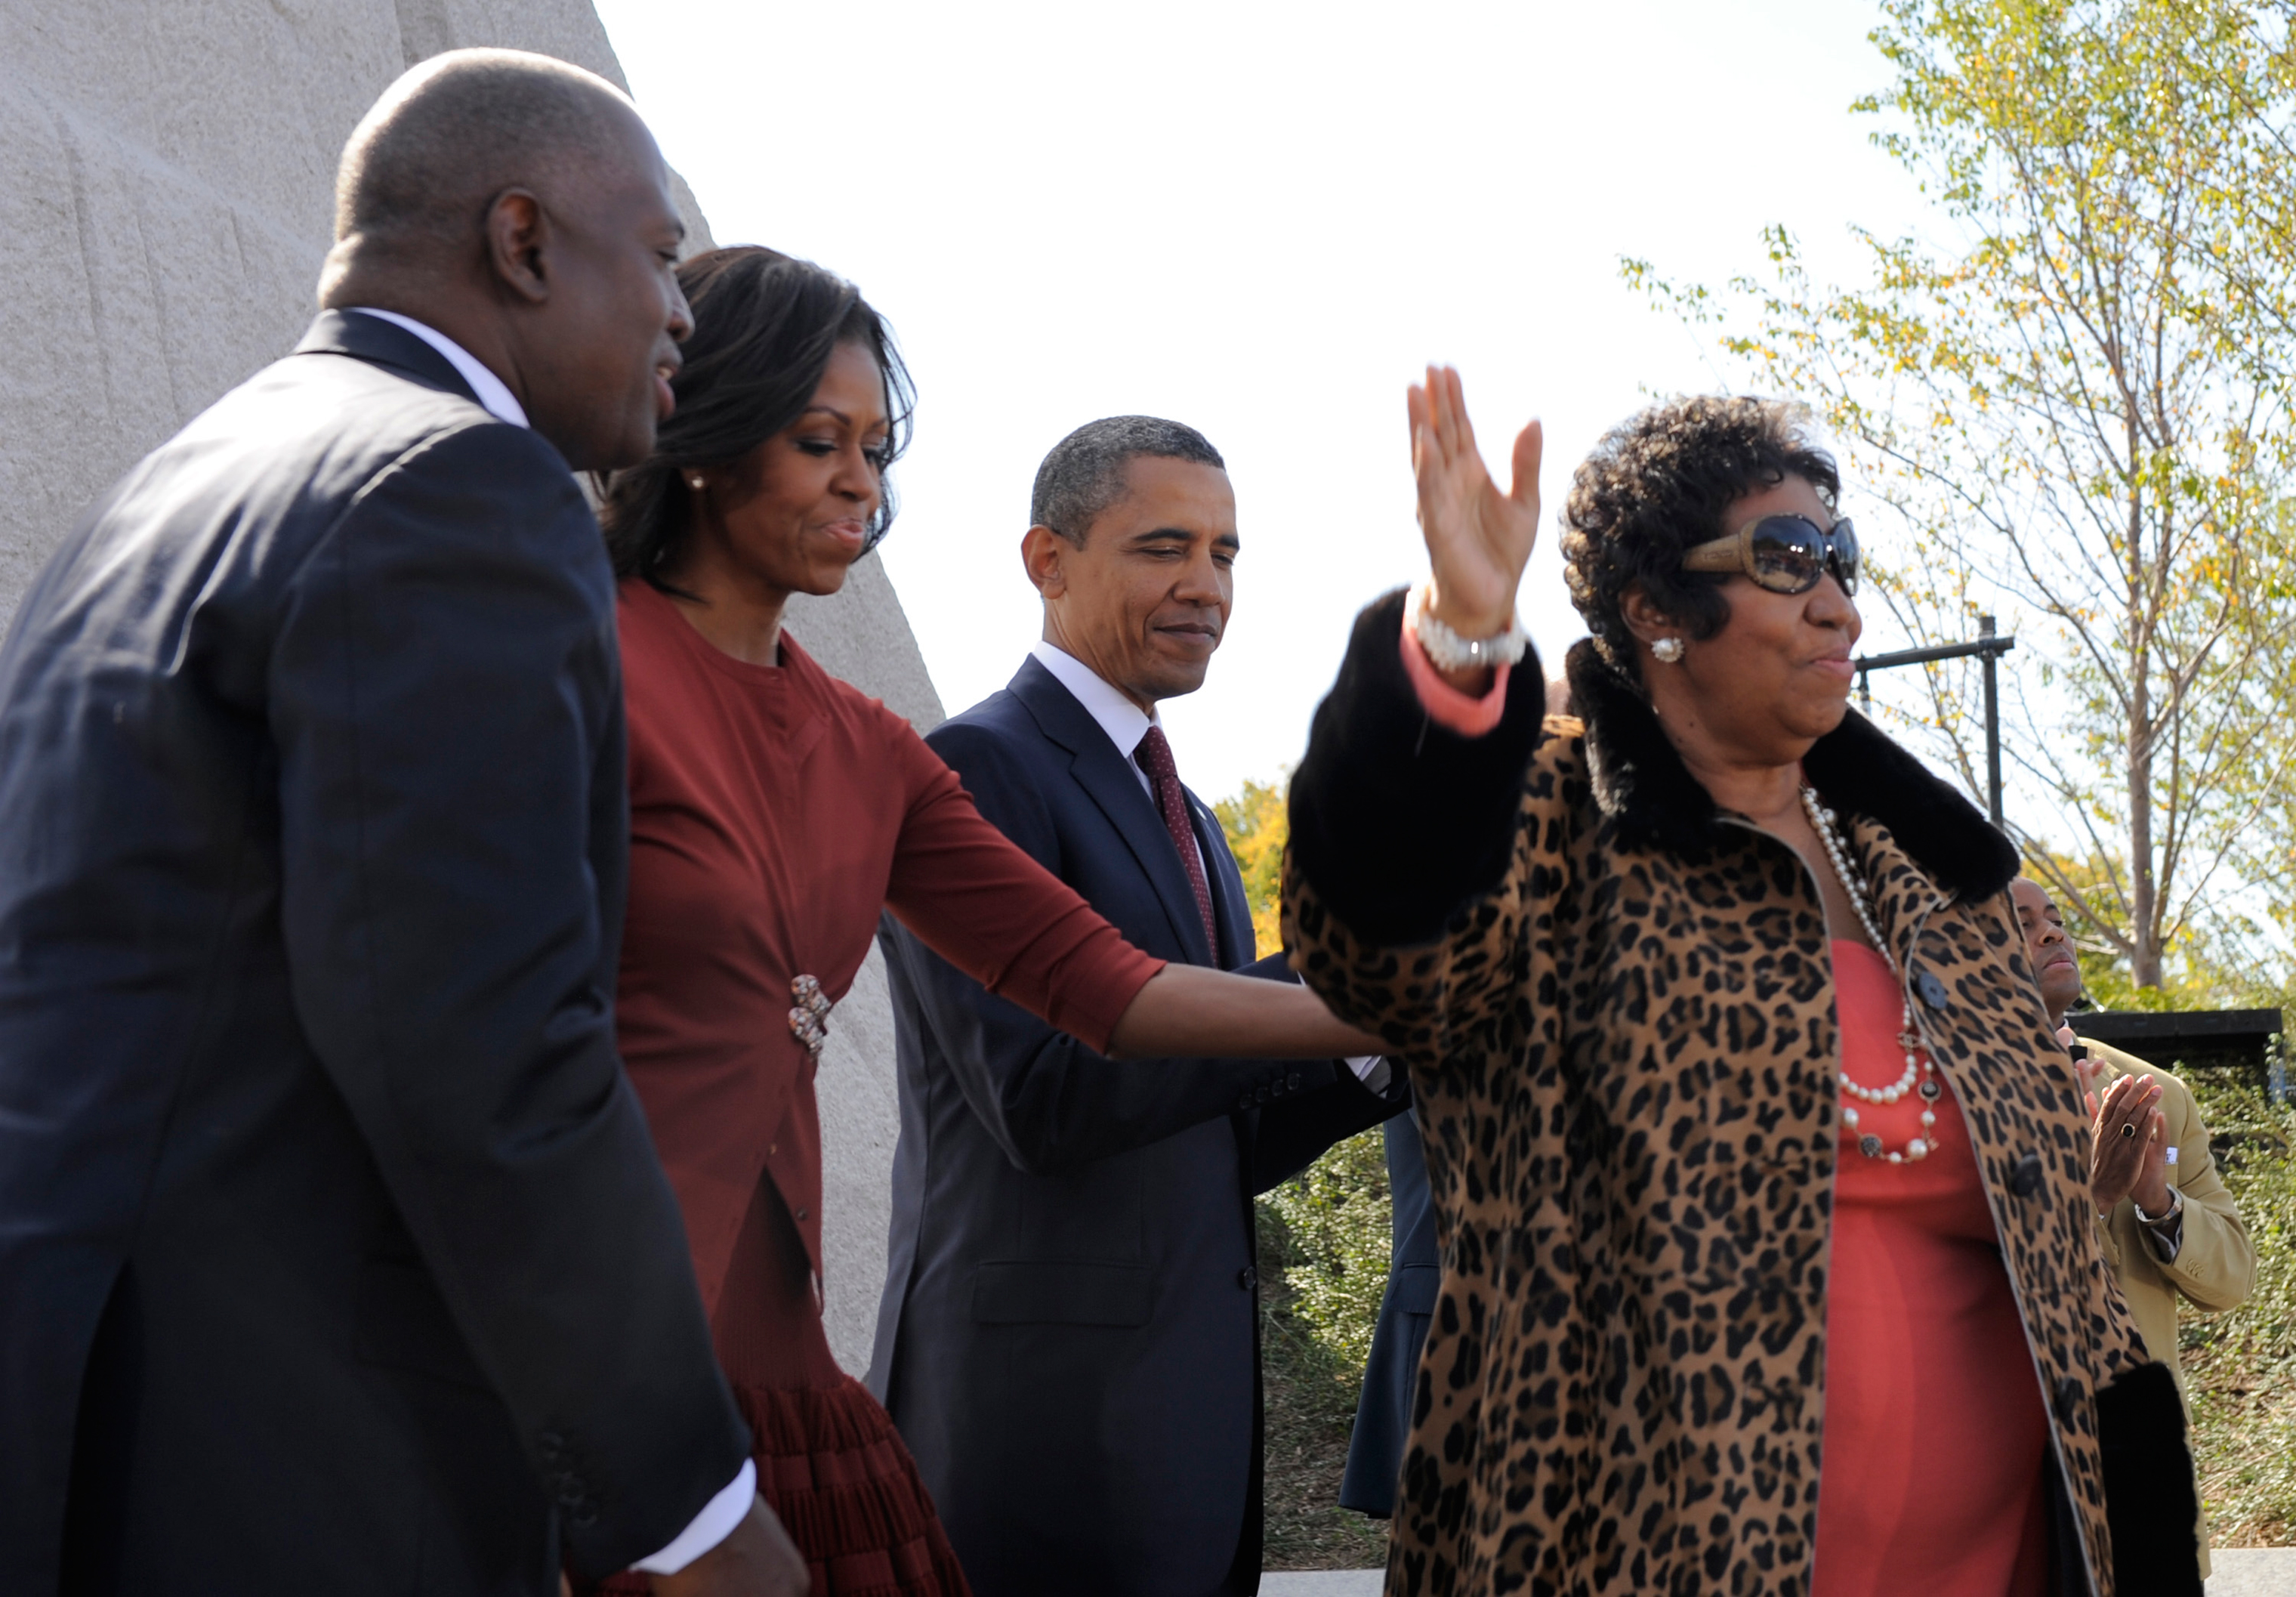 Aretha Franklin, right, finishes her performance with President Barack Obama, first lady Michelle Obama and Harry Johnson, president and CEO of the MLK National Memorial Project Fund as they attend the dedication of the Martin Luther King, Jr. Memorial on the National Mall Oct. 16, 2011 in Washington, DC. (Mike Theiler—Pool/Getty Images)